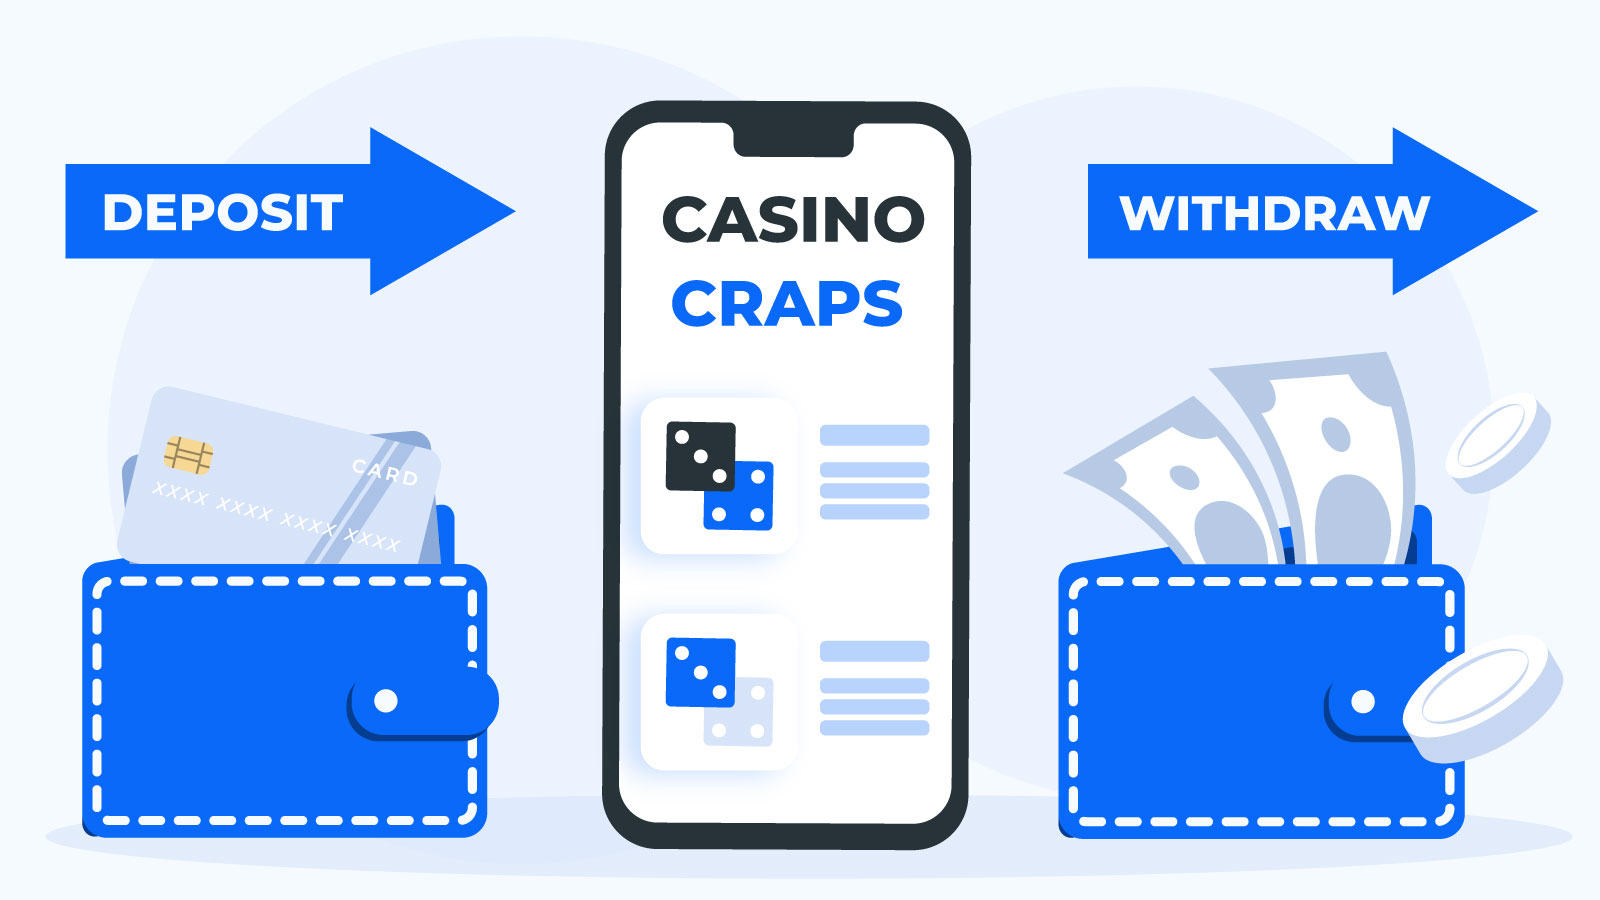 How to Deposit and Withdraw at Craps Casinos